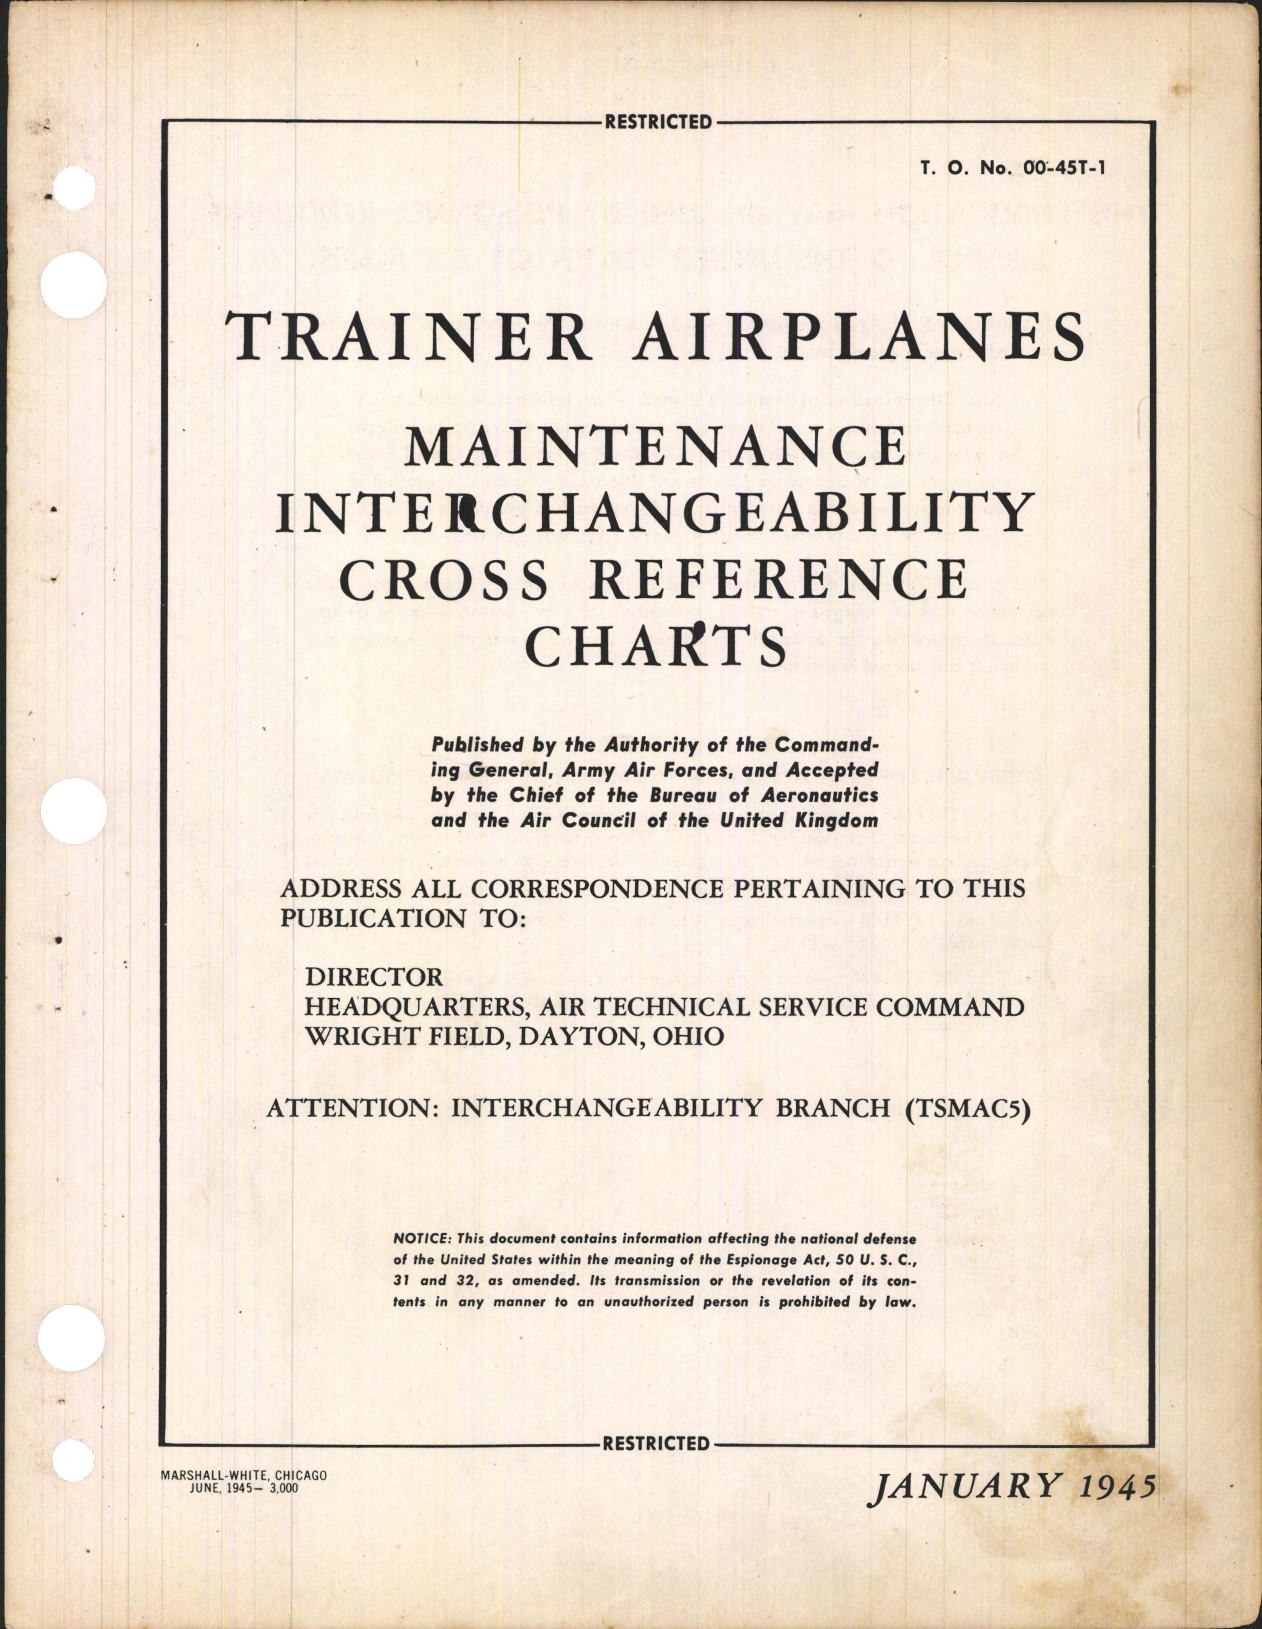 Sample page 3 from AirCorps Library document: Trainer Airplanes Interchangeability and Cross Reference Charts for Airplanes, engines, Parts and Accessories